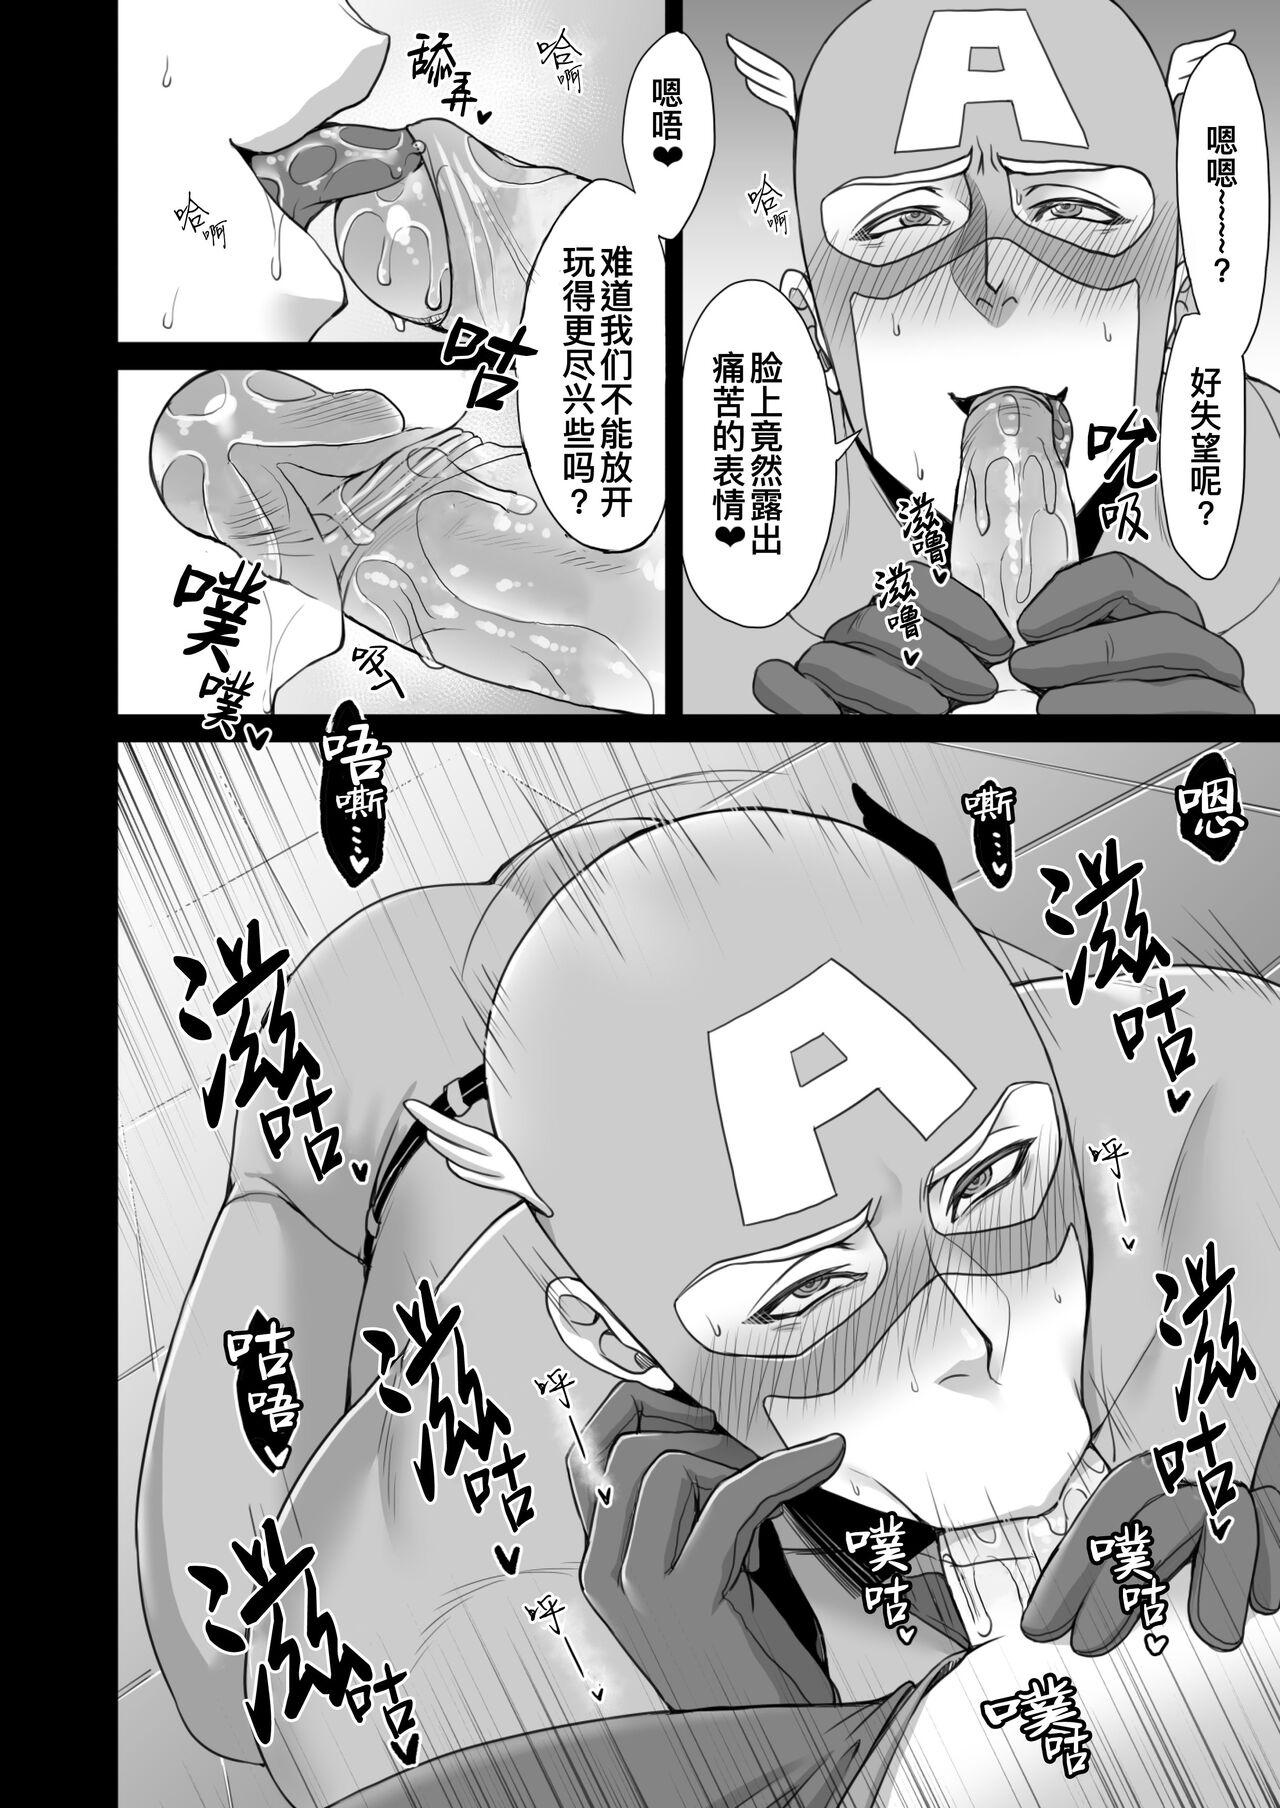 American NO HEROES Our love and hate relationship | 不再需要英雄 - 关于我们之间的爱恨情仇 - Avengers Fake Tits - Page 10